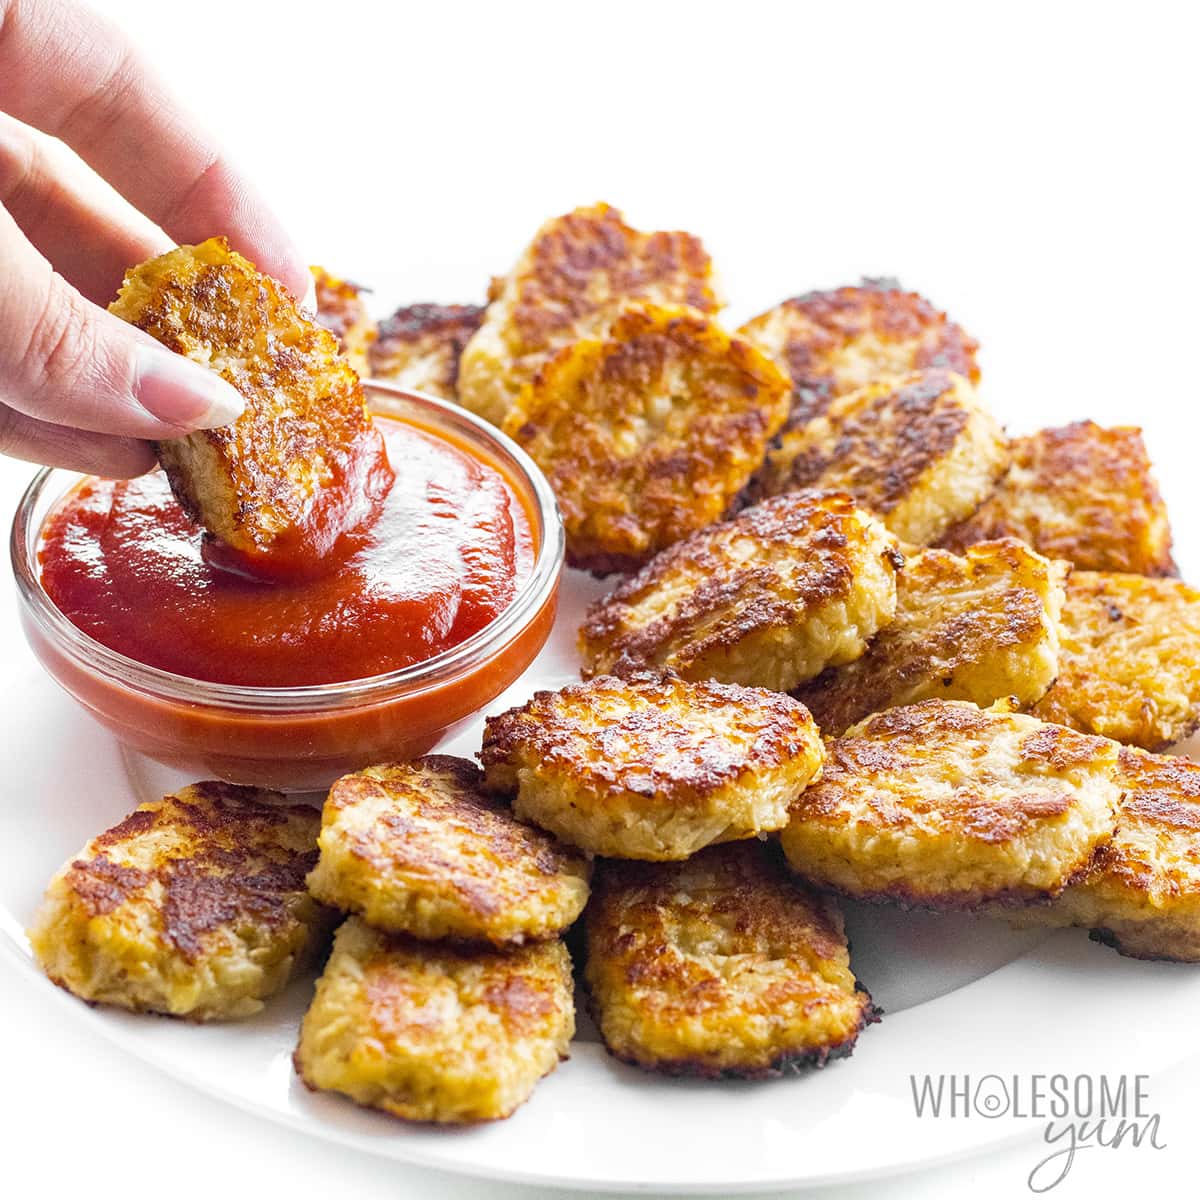 Cauliflower tots dipped in ketchup.